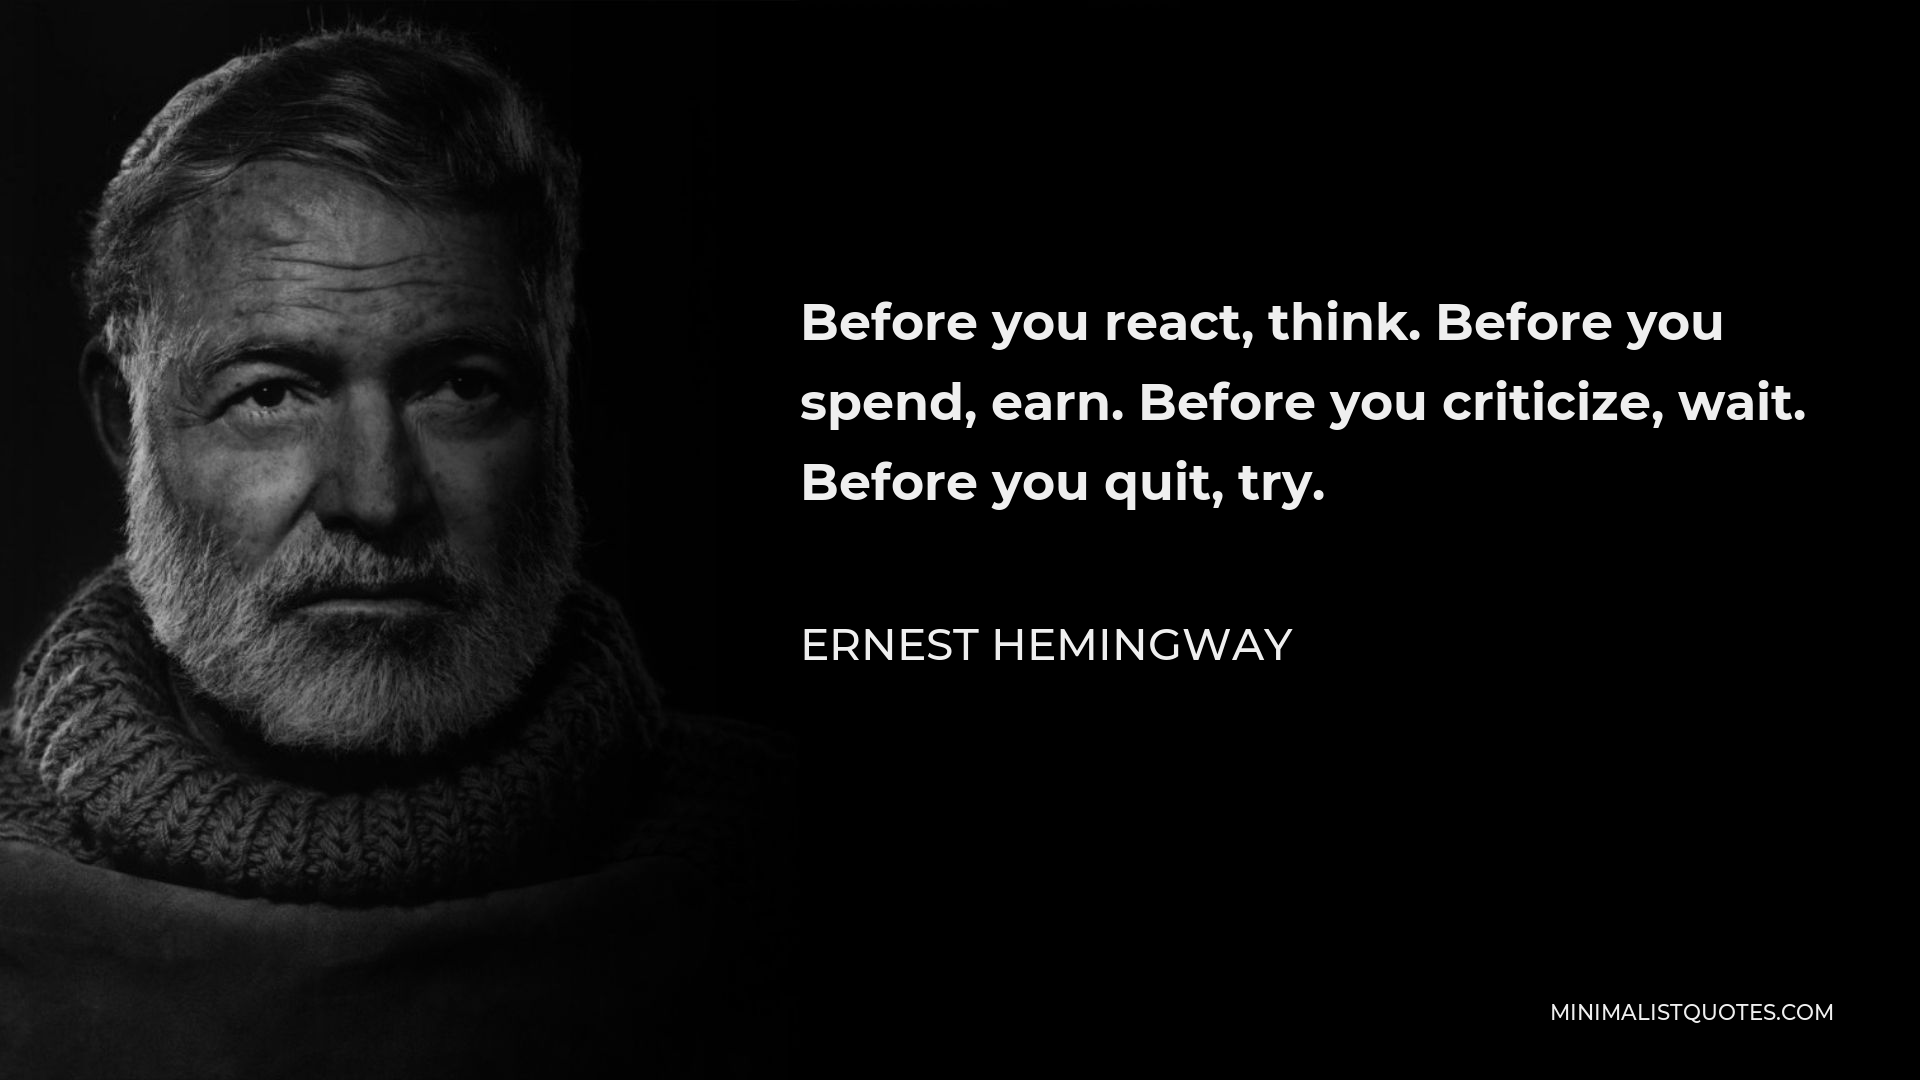 Ernest Hemingway Quote - Before you react, think. Before you spend, earn. Before you criticize, wait. Before you quit, try.